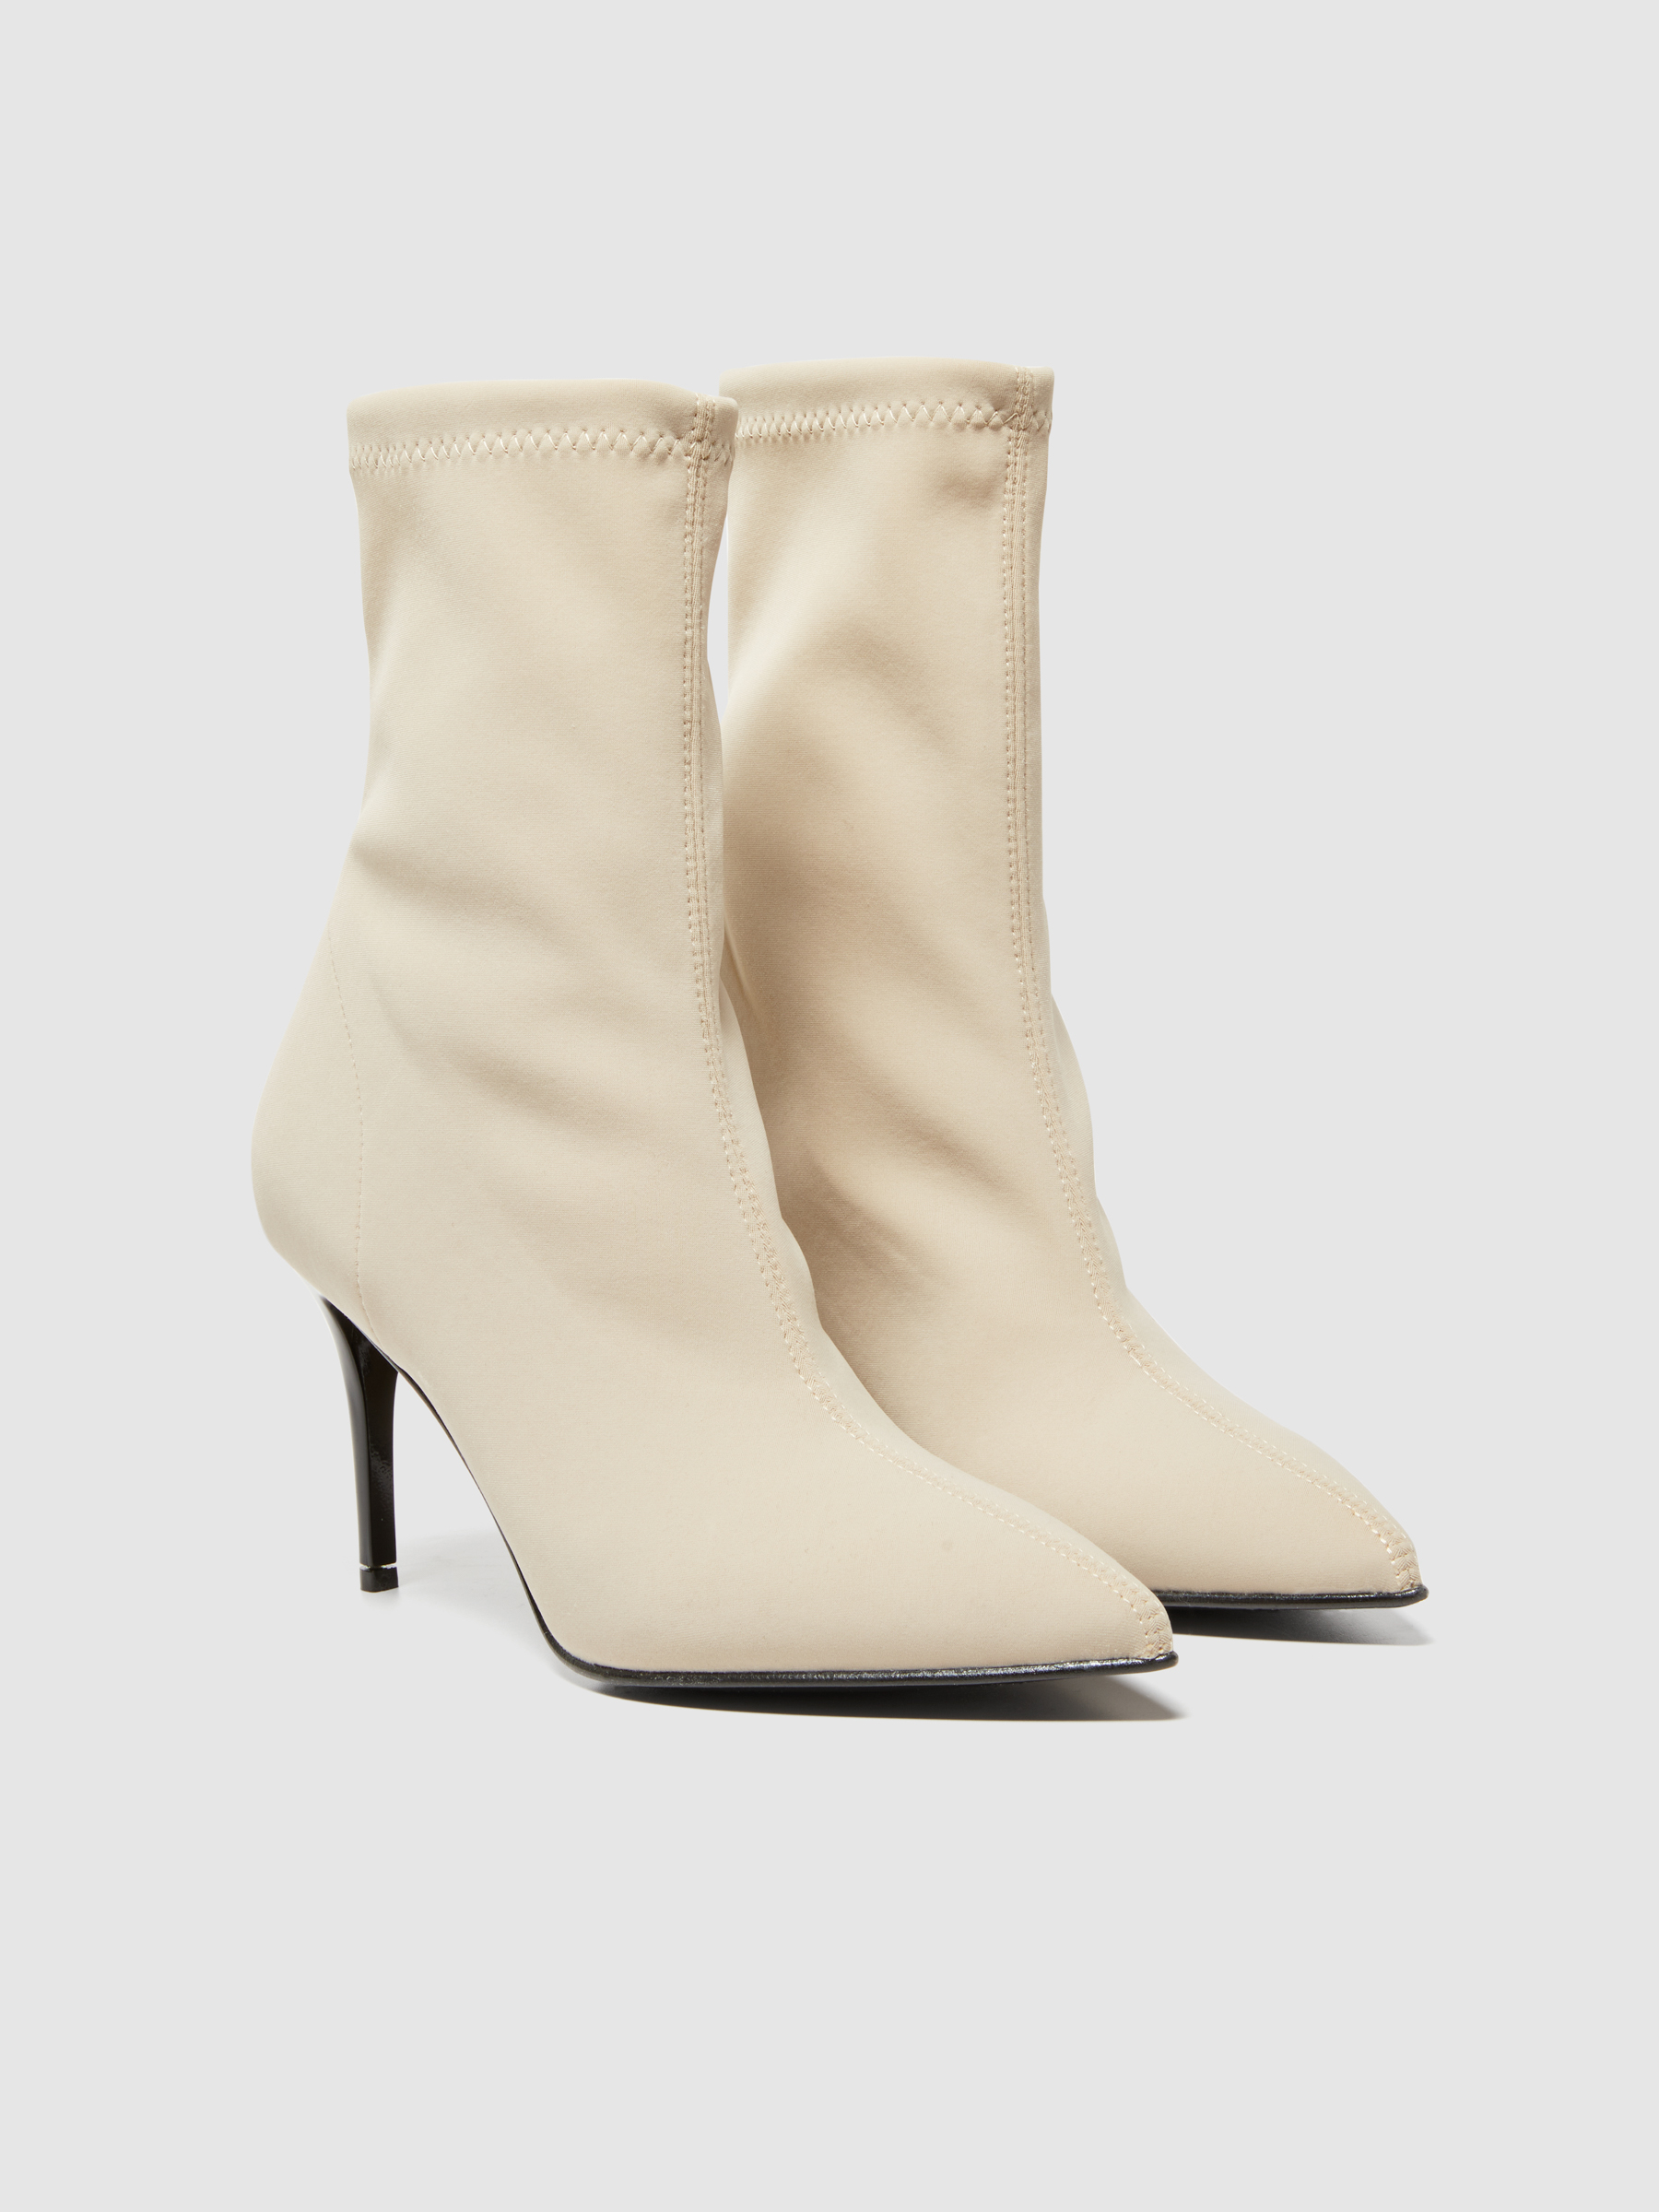 Sisley - Sock Ankle Boots, Woman, Creamy White, Size: 40